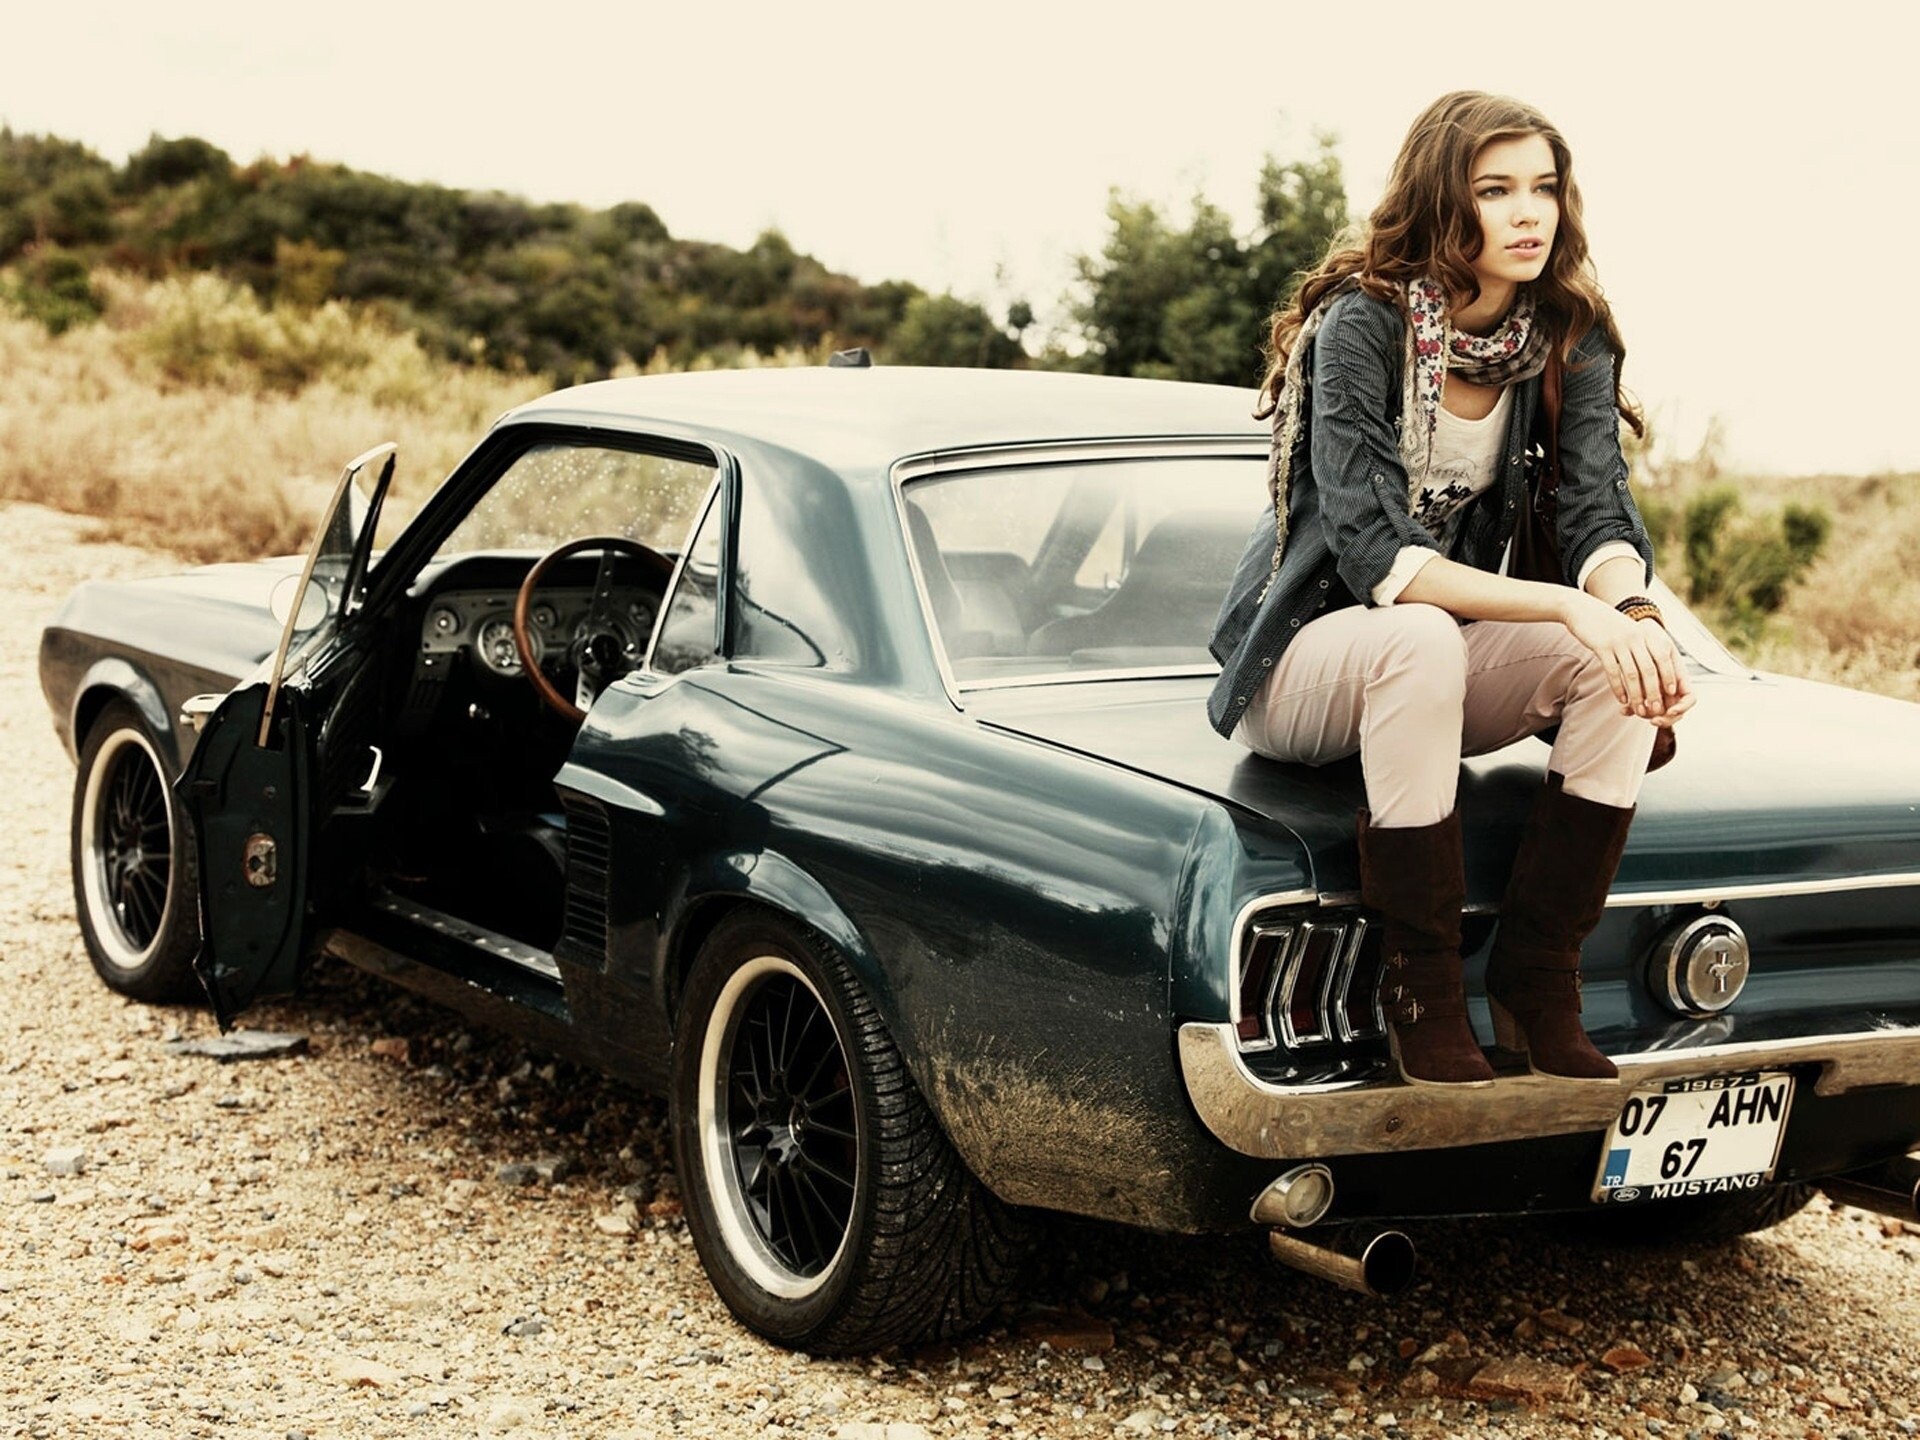 Girls and Muscle Cars: Ford Mustang 1967, A two-door sports coupe, Off-roading, Driving through muddy terrain. 1920x1440 HD Background.